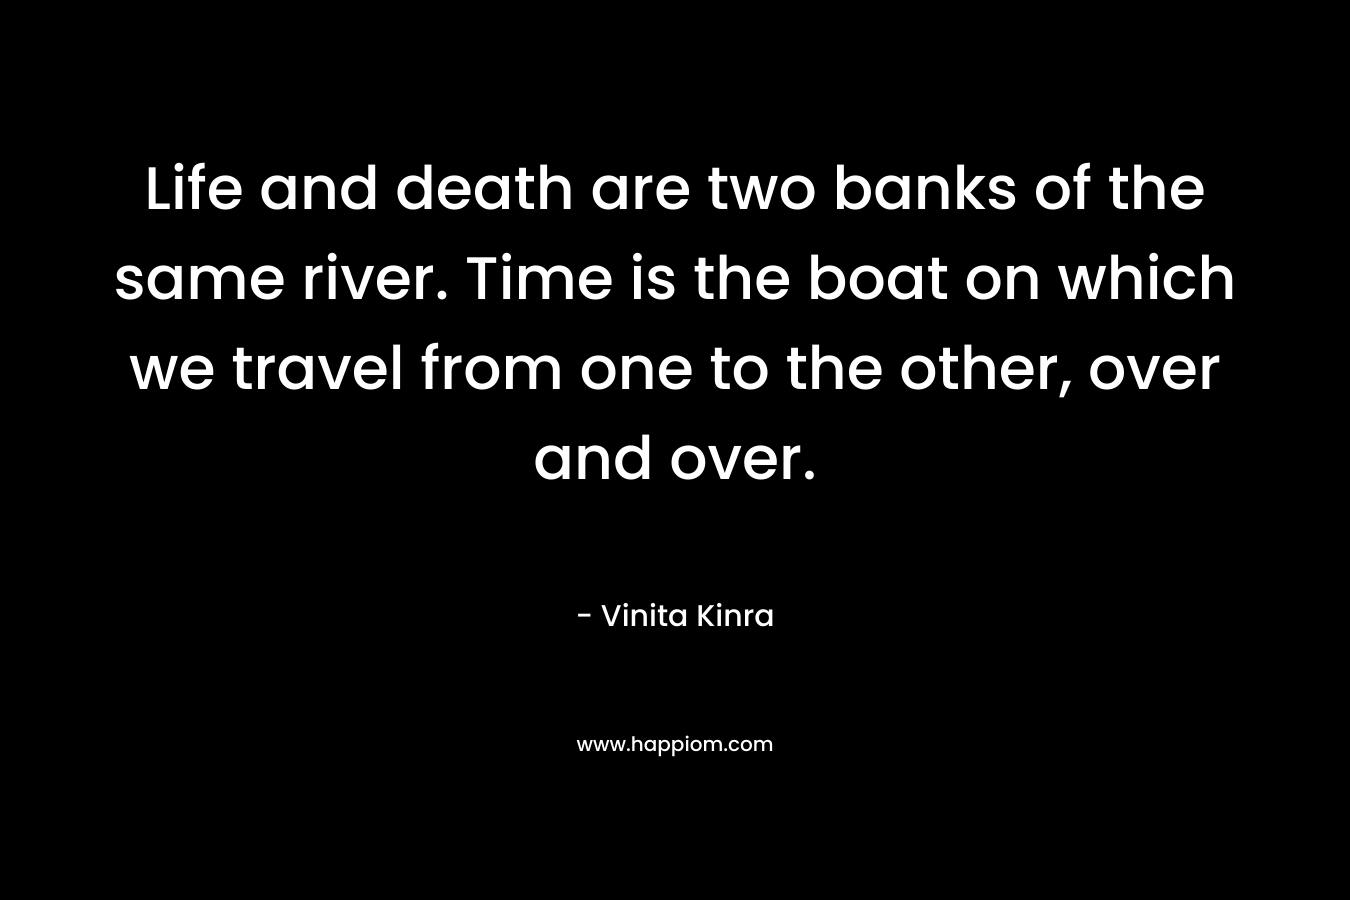 Life and death are two banks of the same river. Time is the boat on which we travel from one to the other, over and over. – Vinita Kinra